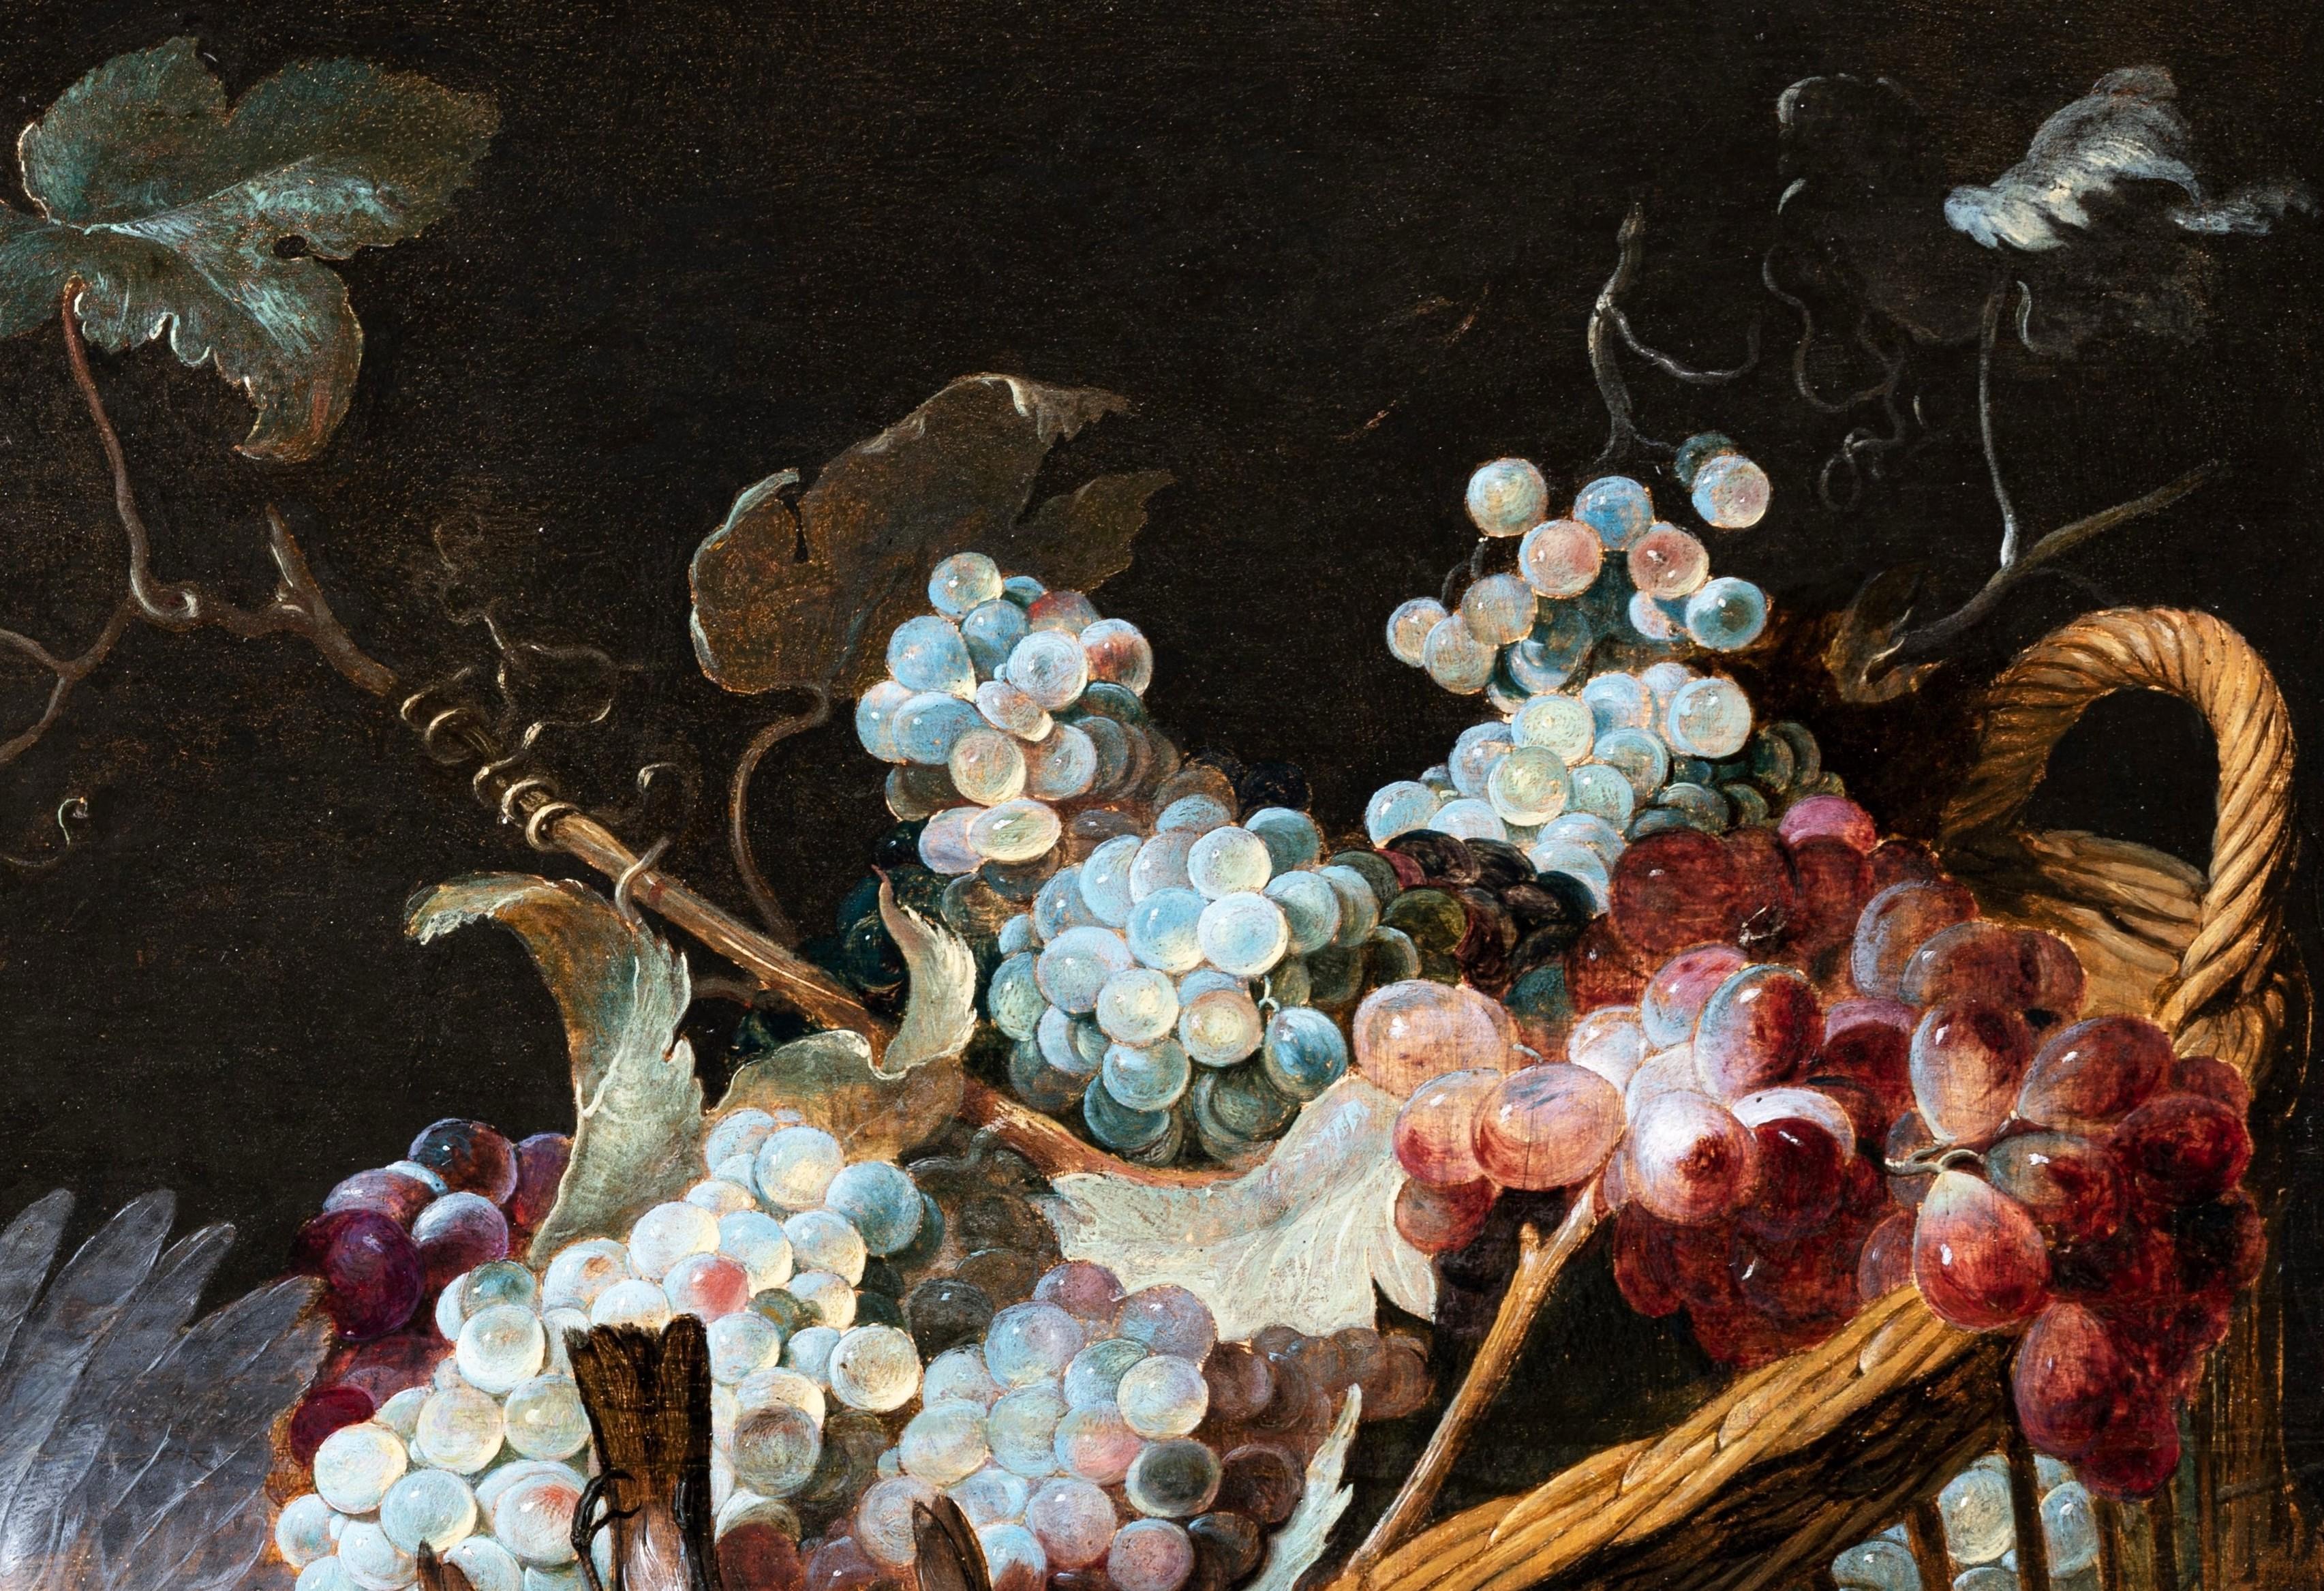 STILL LIFE WITH BIRDS AND RAISINS, WORKSHOP OF FRANS SNYDERS (1579-1657)
An exquisite and attractive work, our painting with its rich and harmonious composition is one of the remarkable examples of the passion of art lovers of the 17th century for